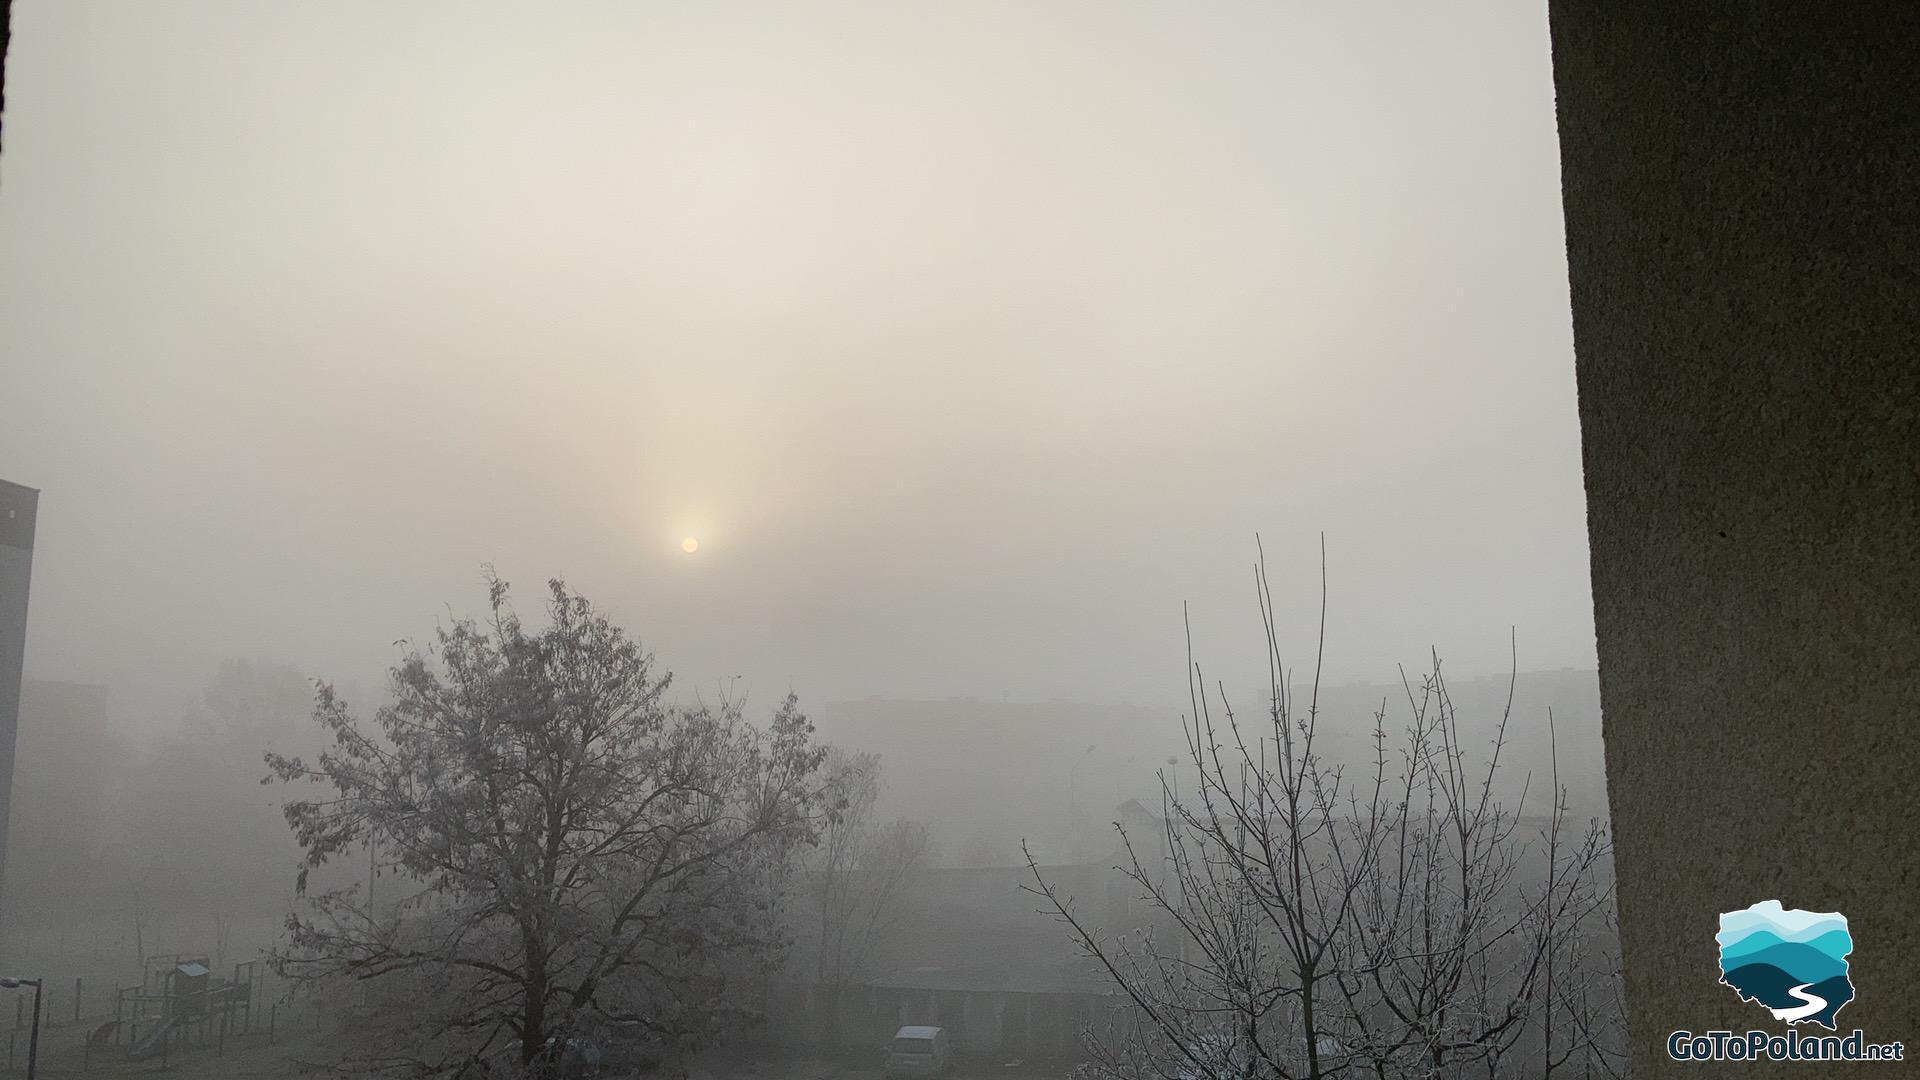 A fog in the morning, we can barely see a few block of flats in the background 